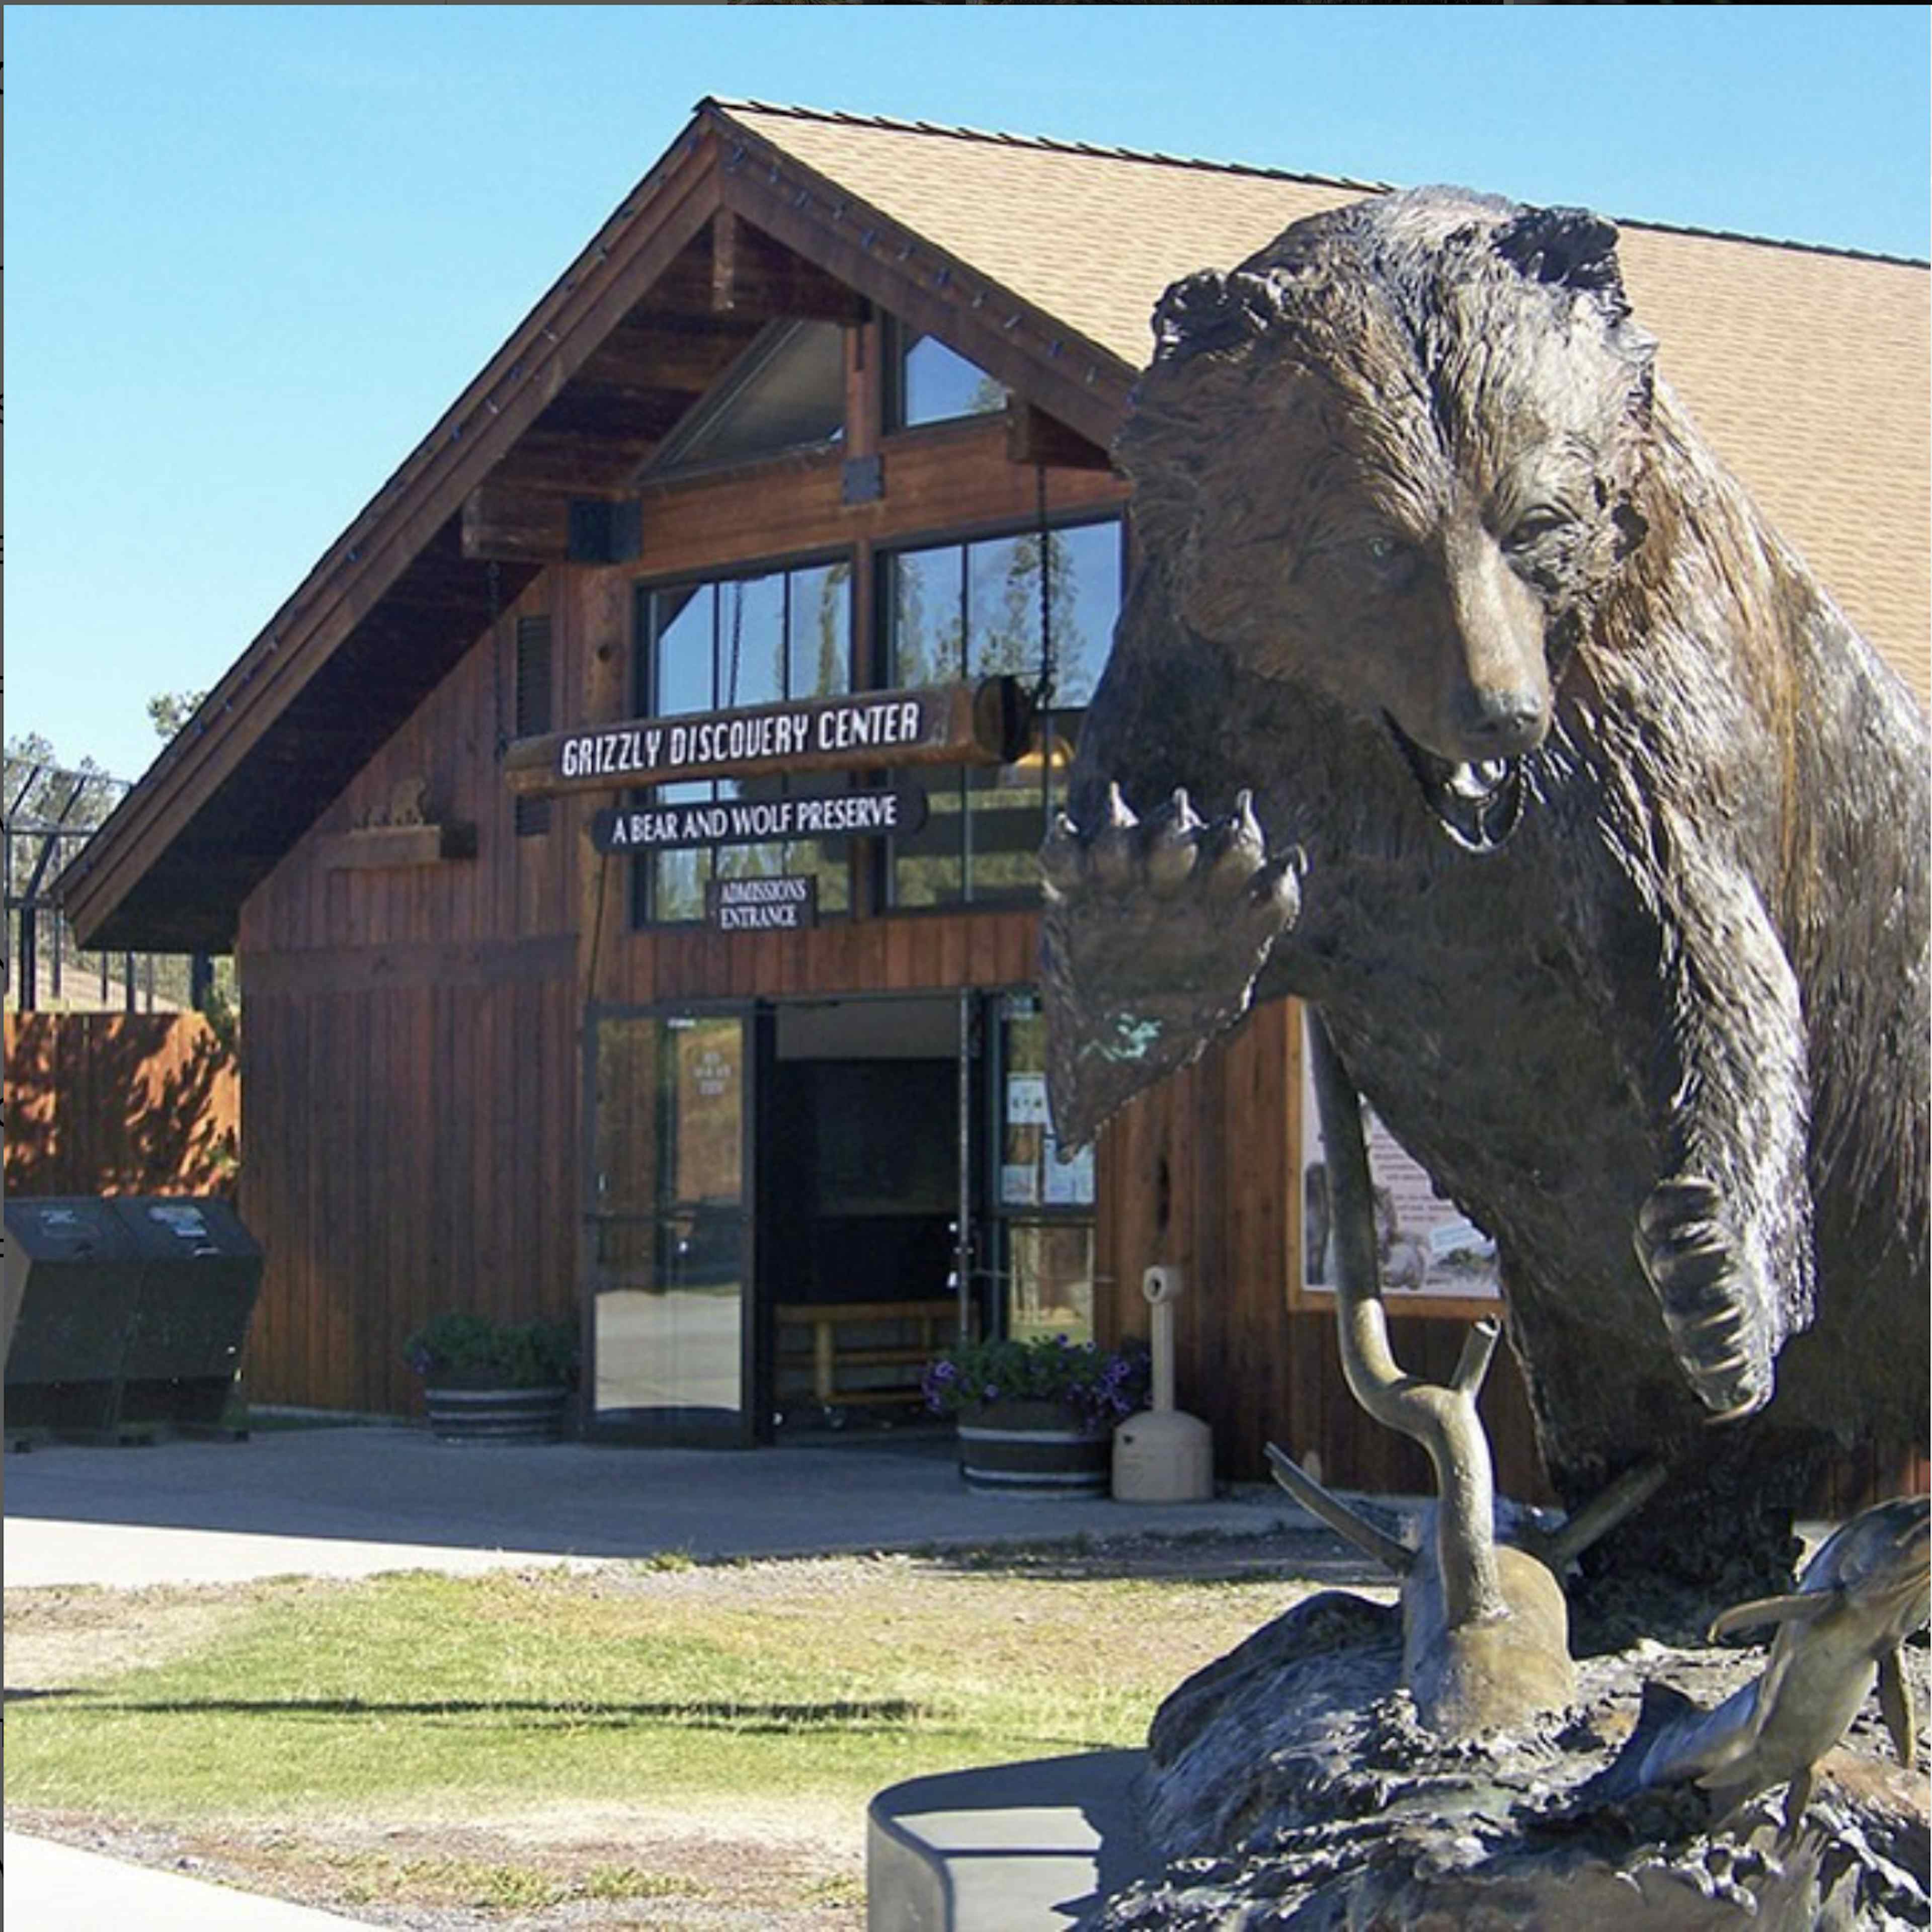 Front of the building with a bear sculpture